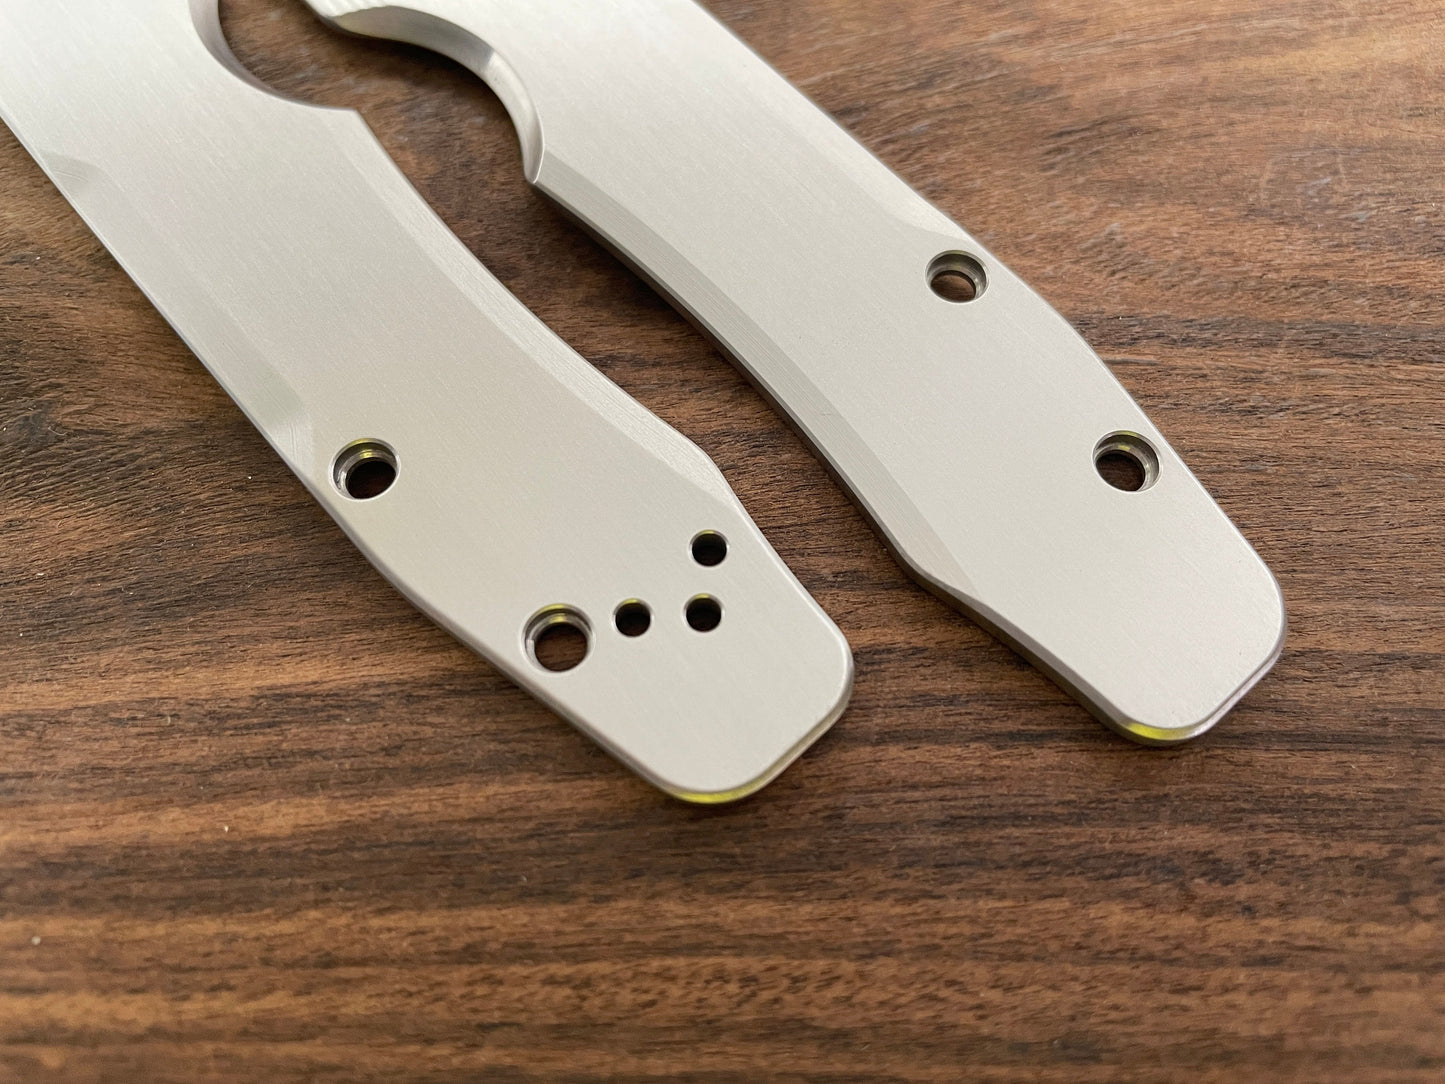 Brushed Titanium Scales for Spyderco SMOCK